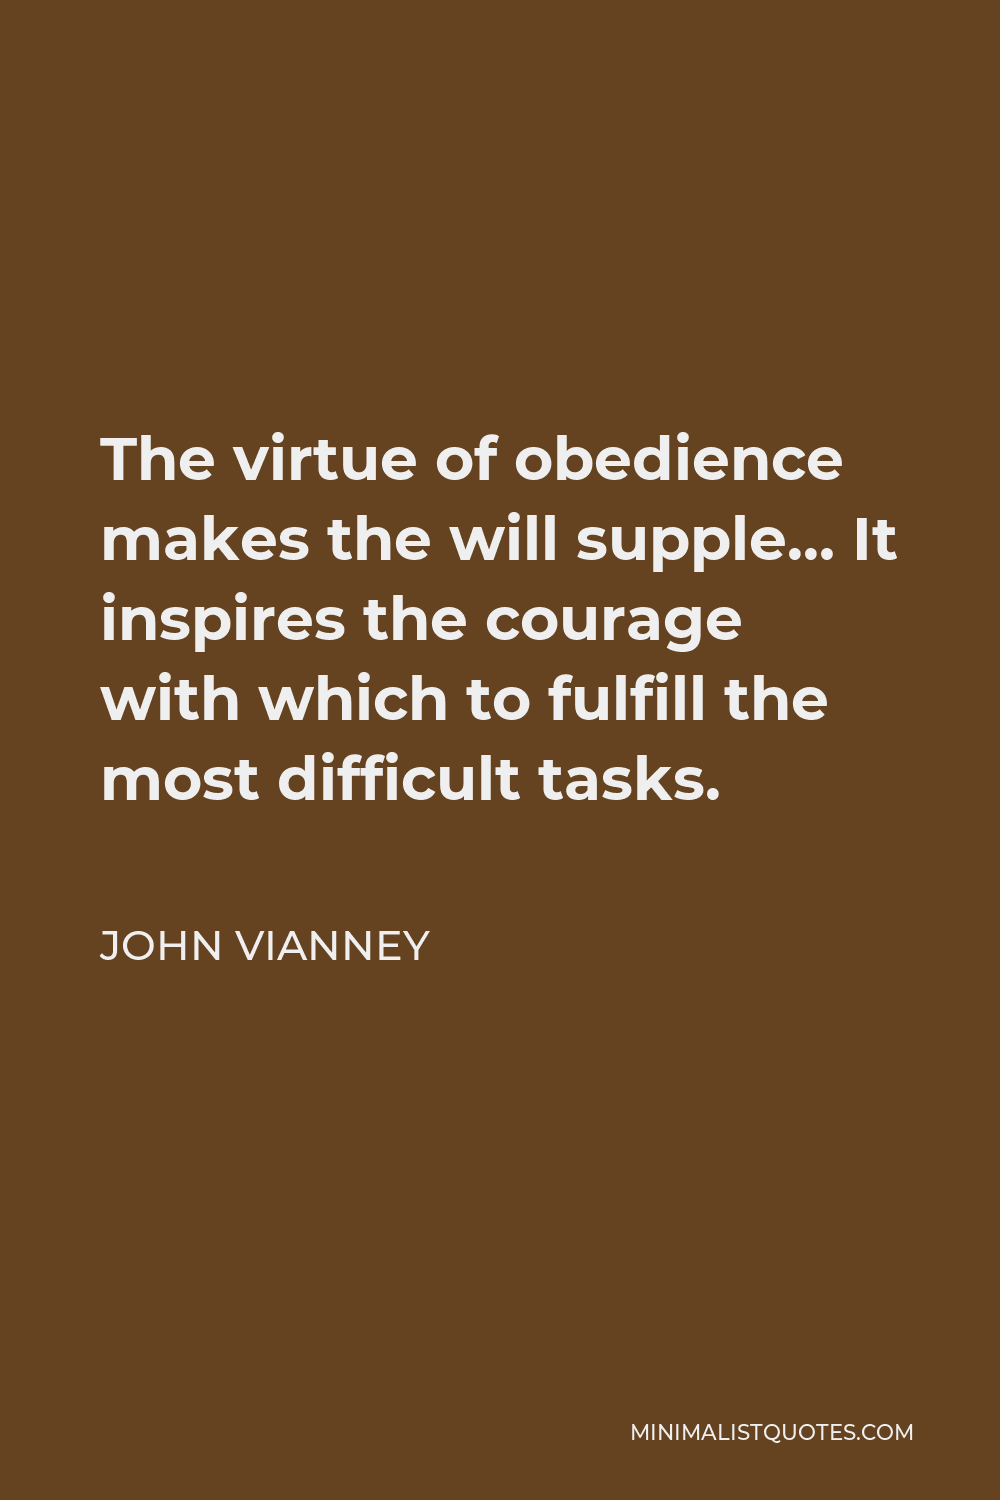 John Vianney Quote - The virtue of obedience makes the will supple… It inspires the courage with which to fulfill the most difficult tasks.